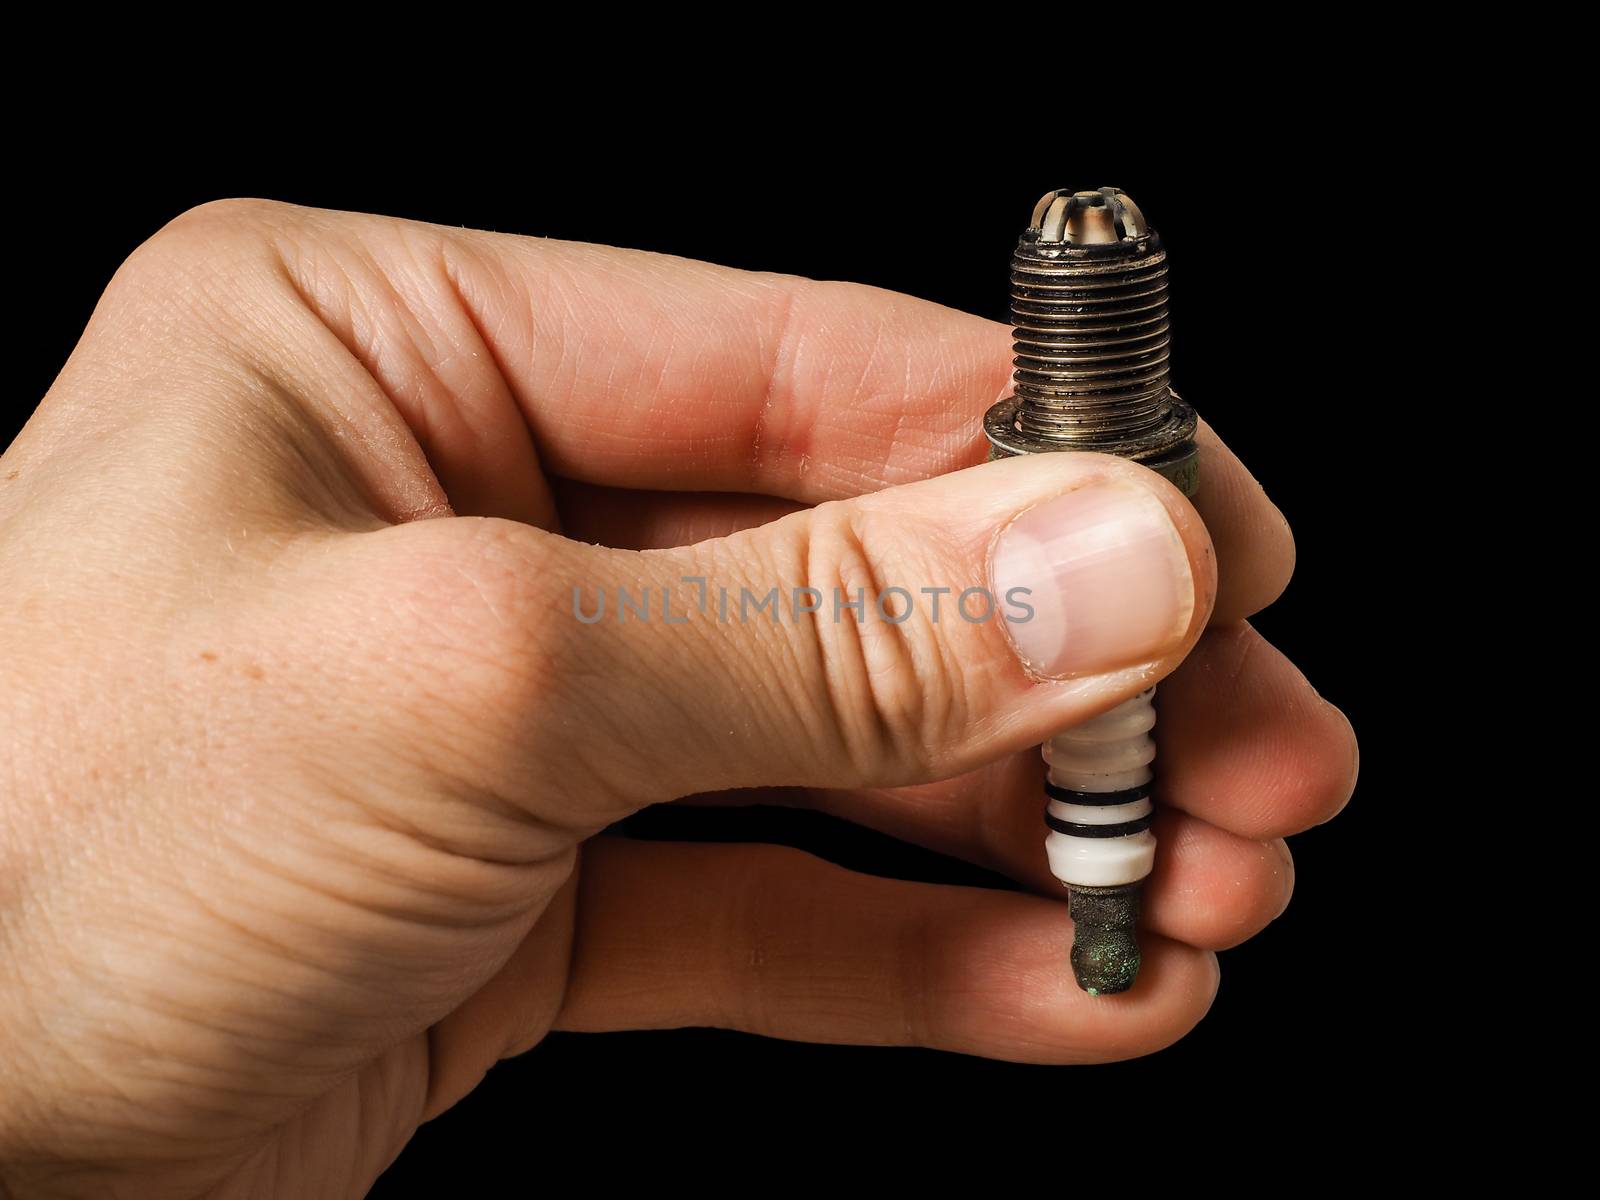 Closeup of a worn spark plug held by caucasian male fingers by Arvebettum